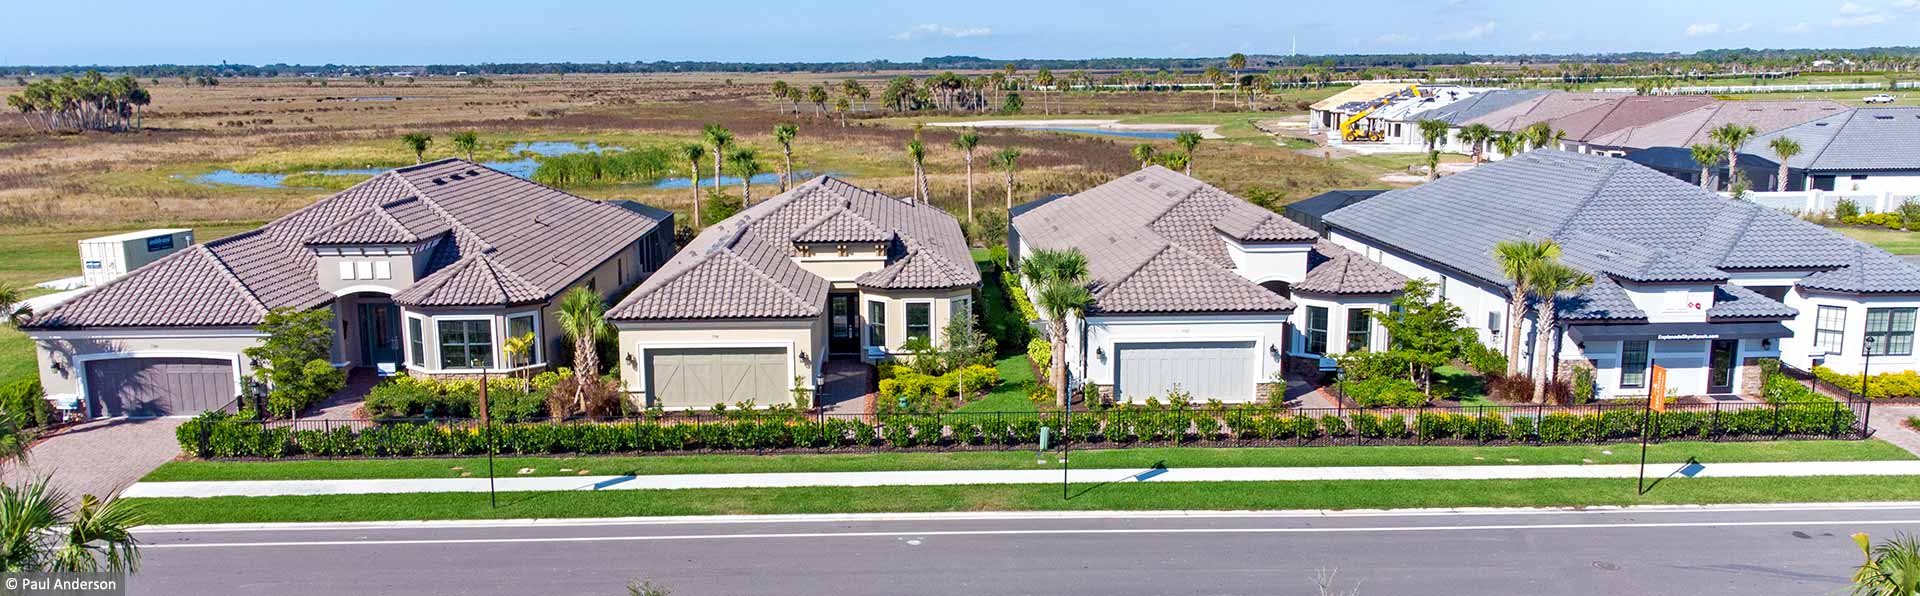 row of Florida homes with tile roofs